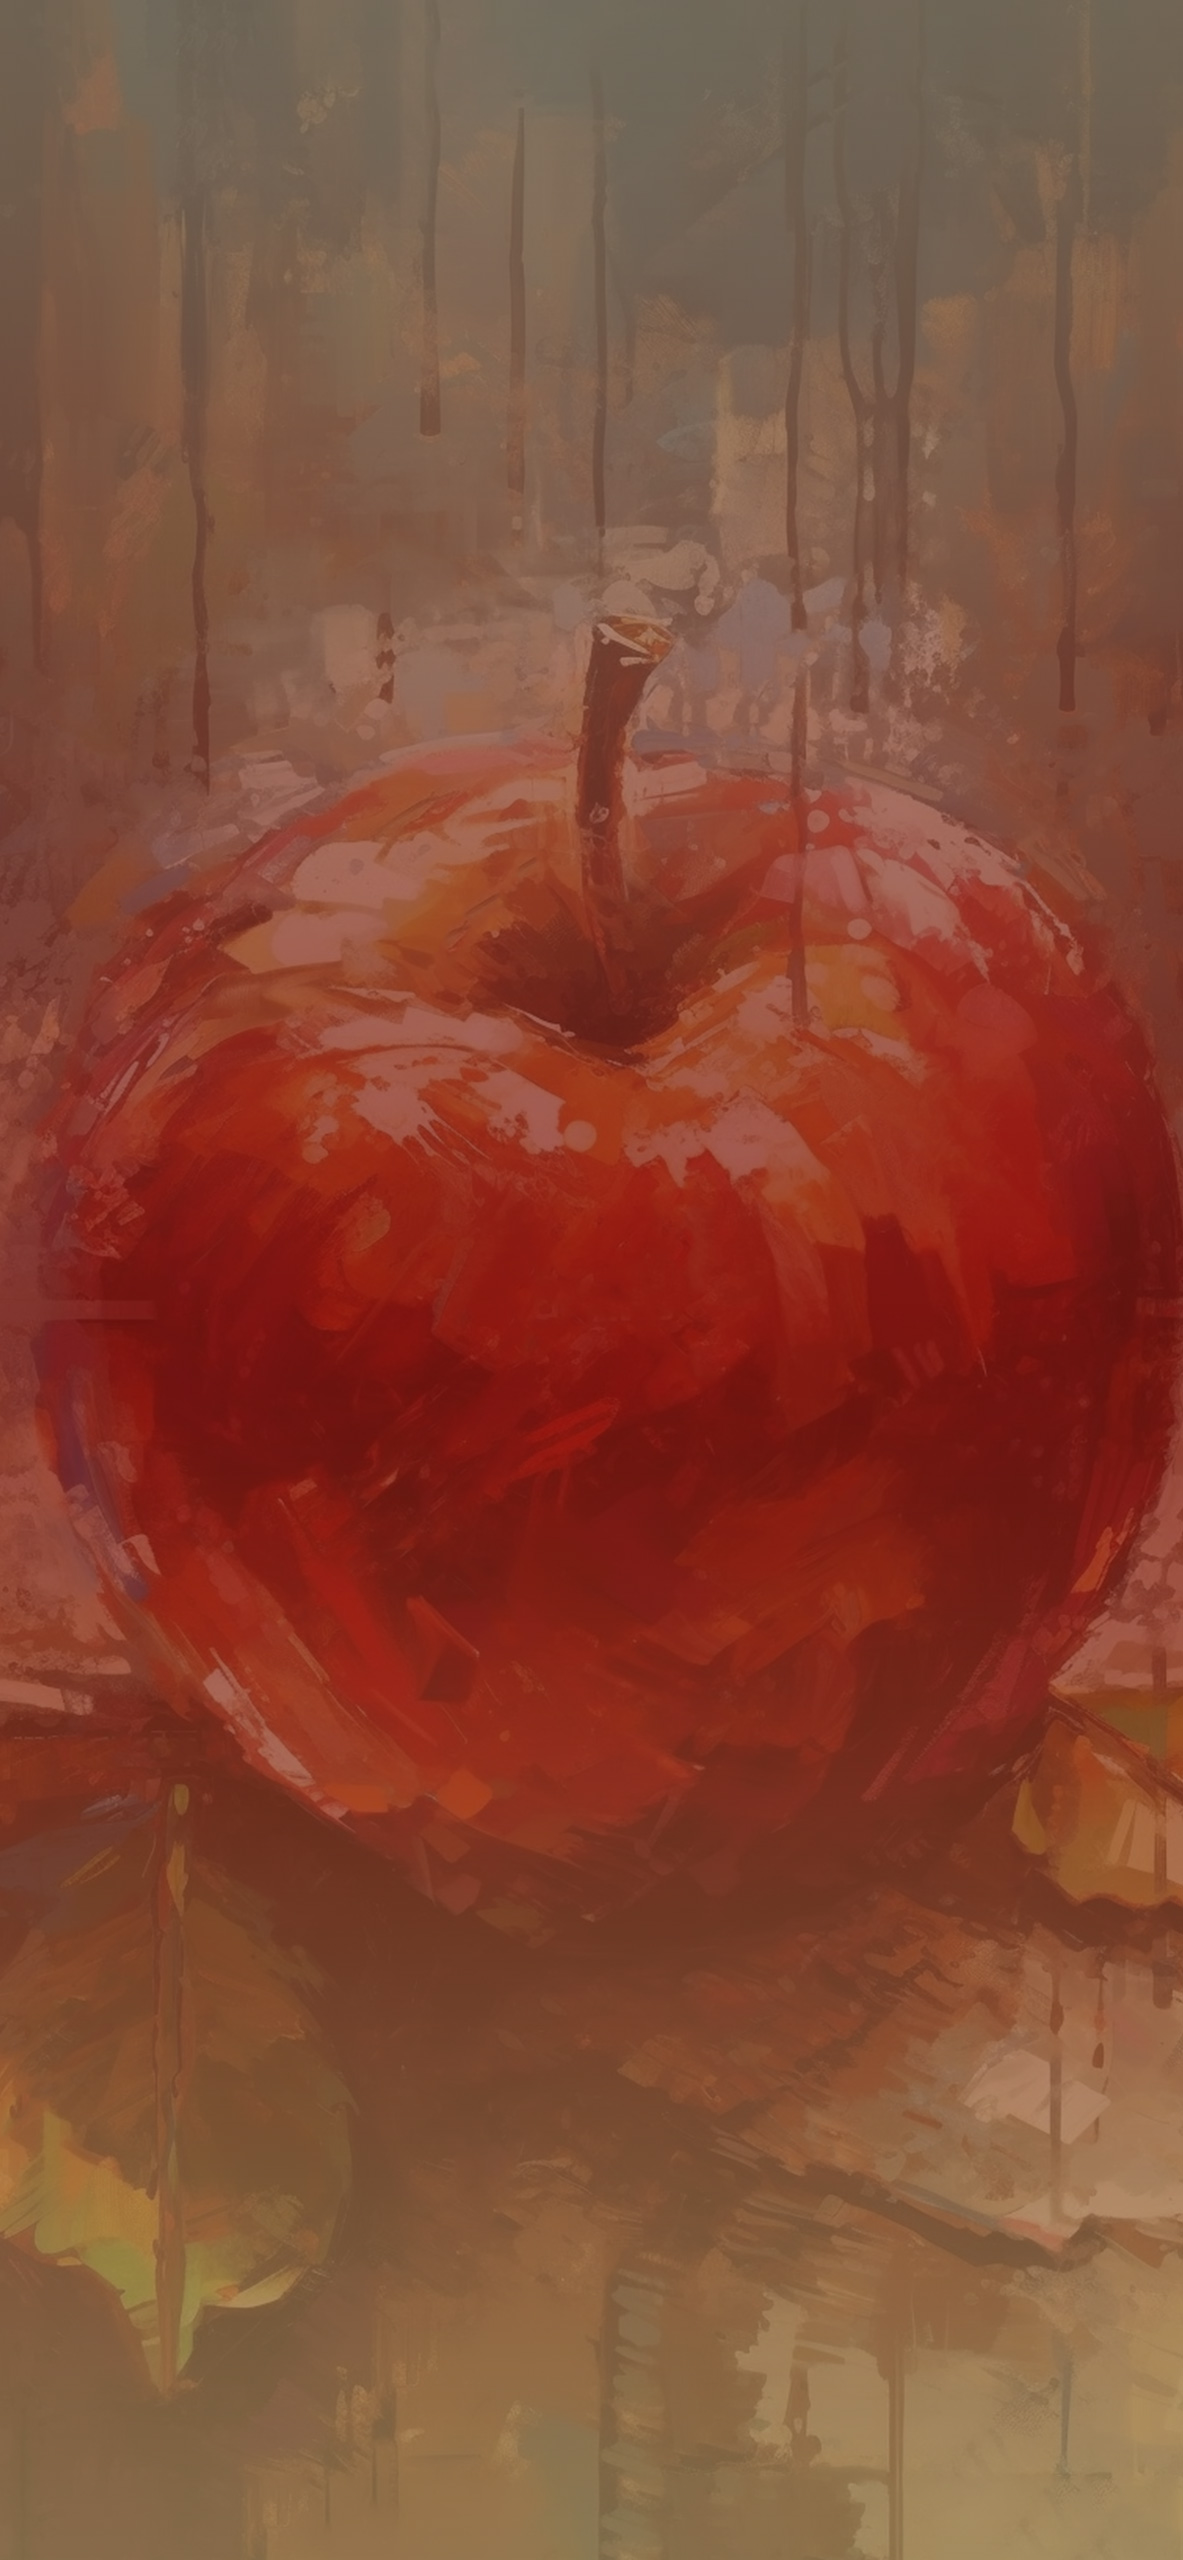 red apple painting background